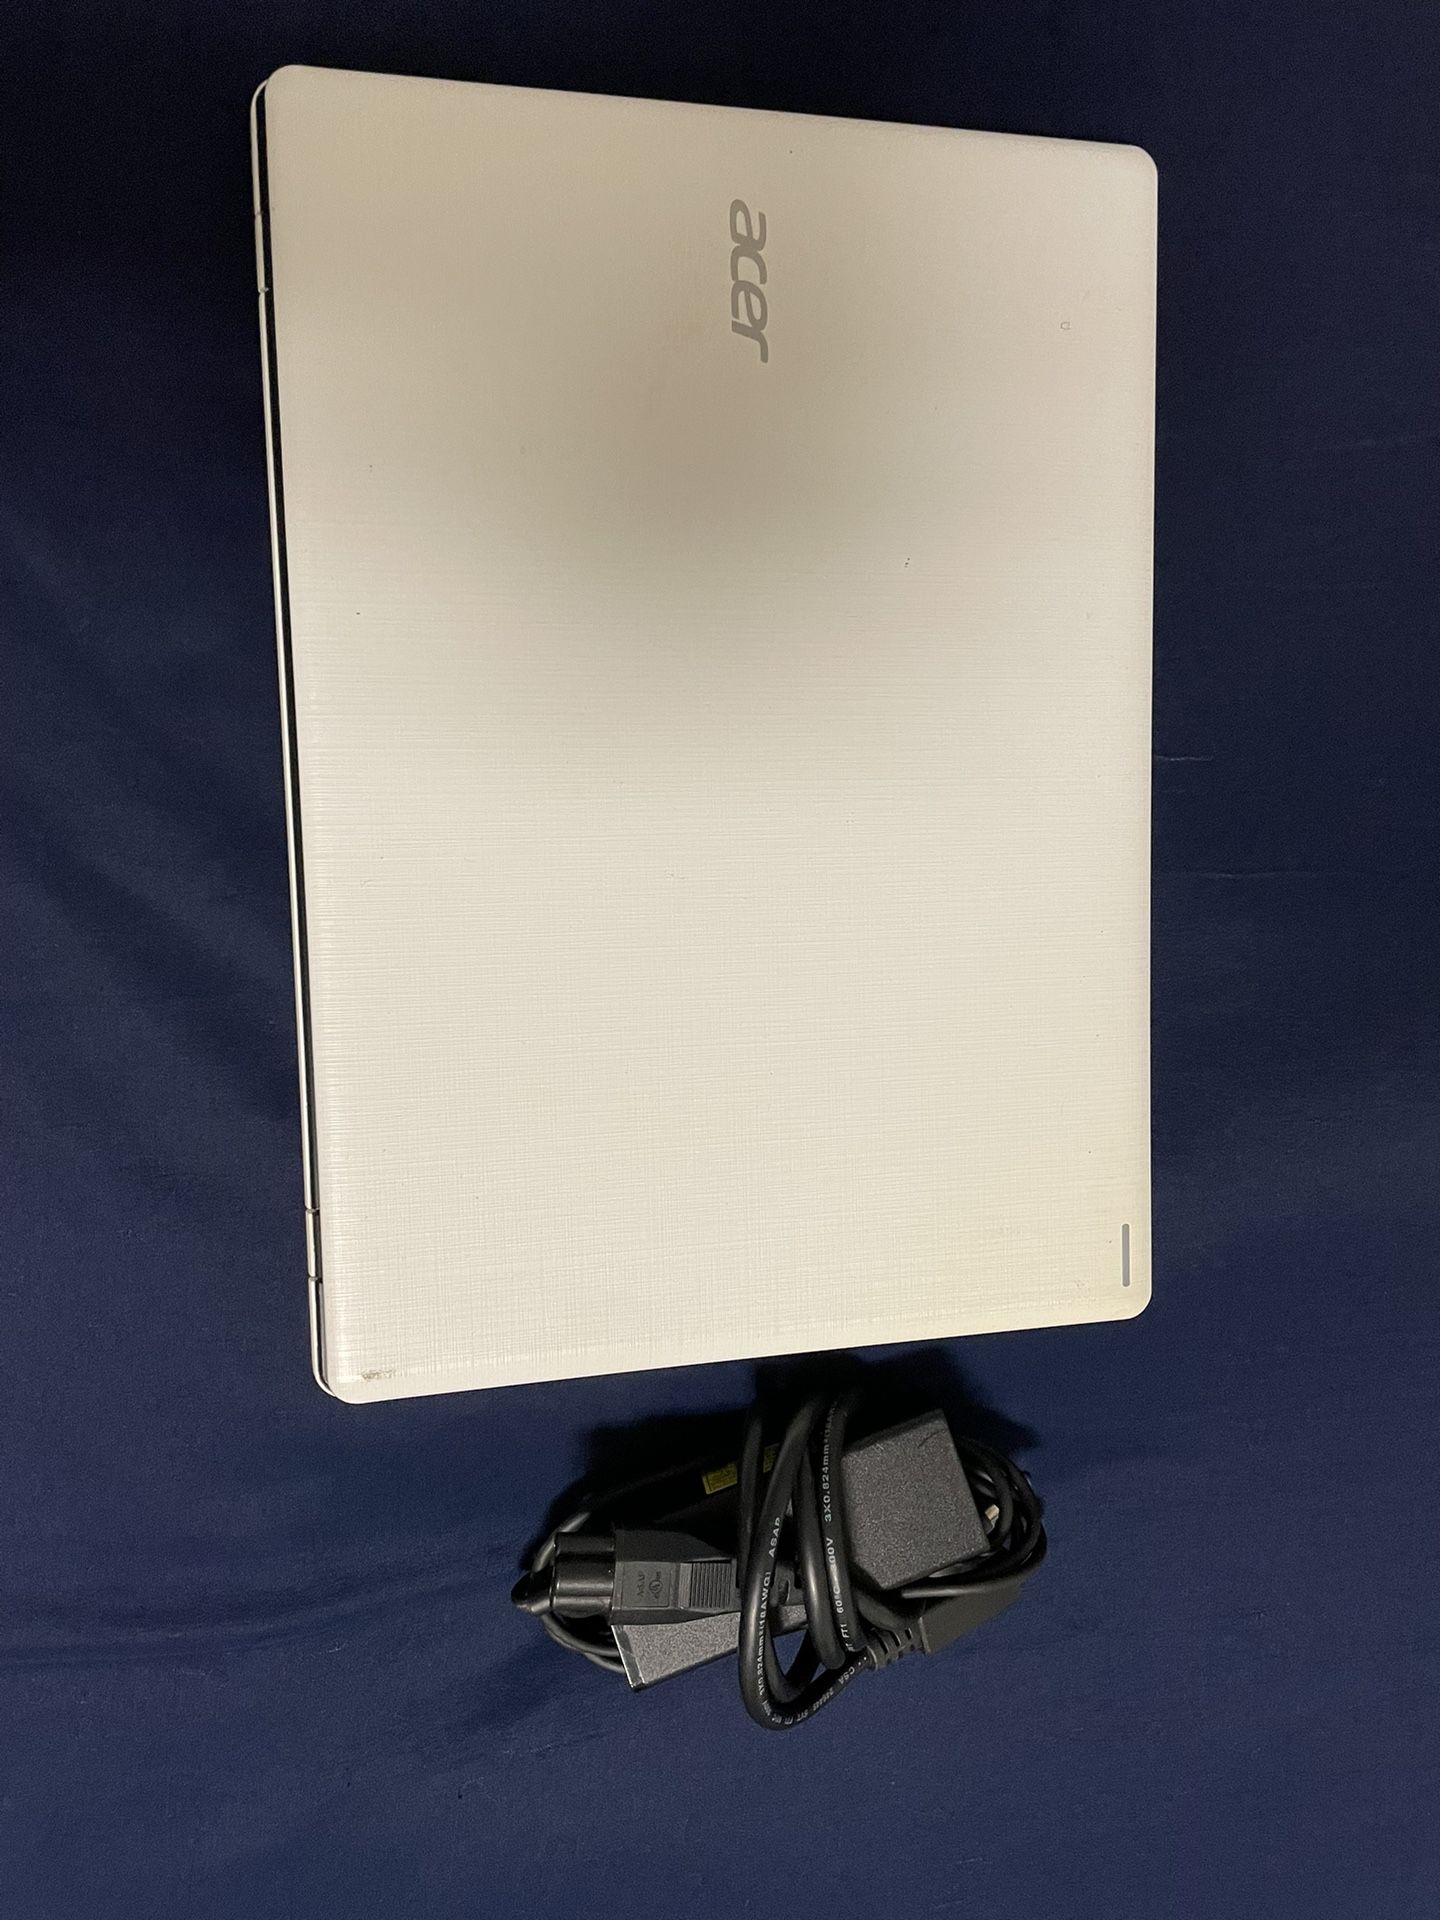 Acer A01-132 Series Laptop 